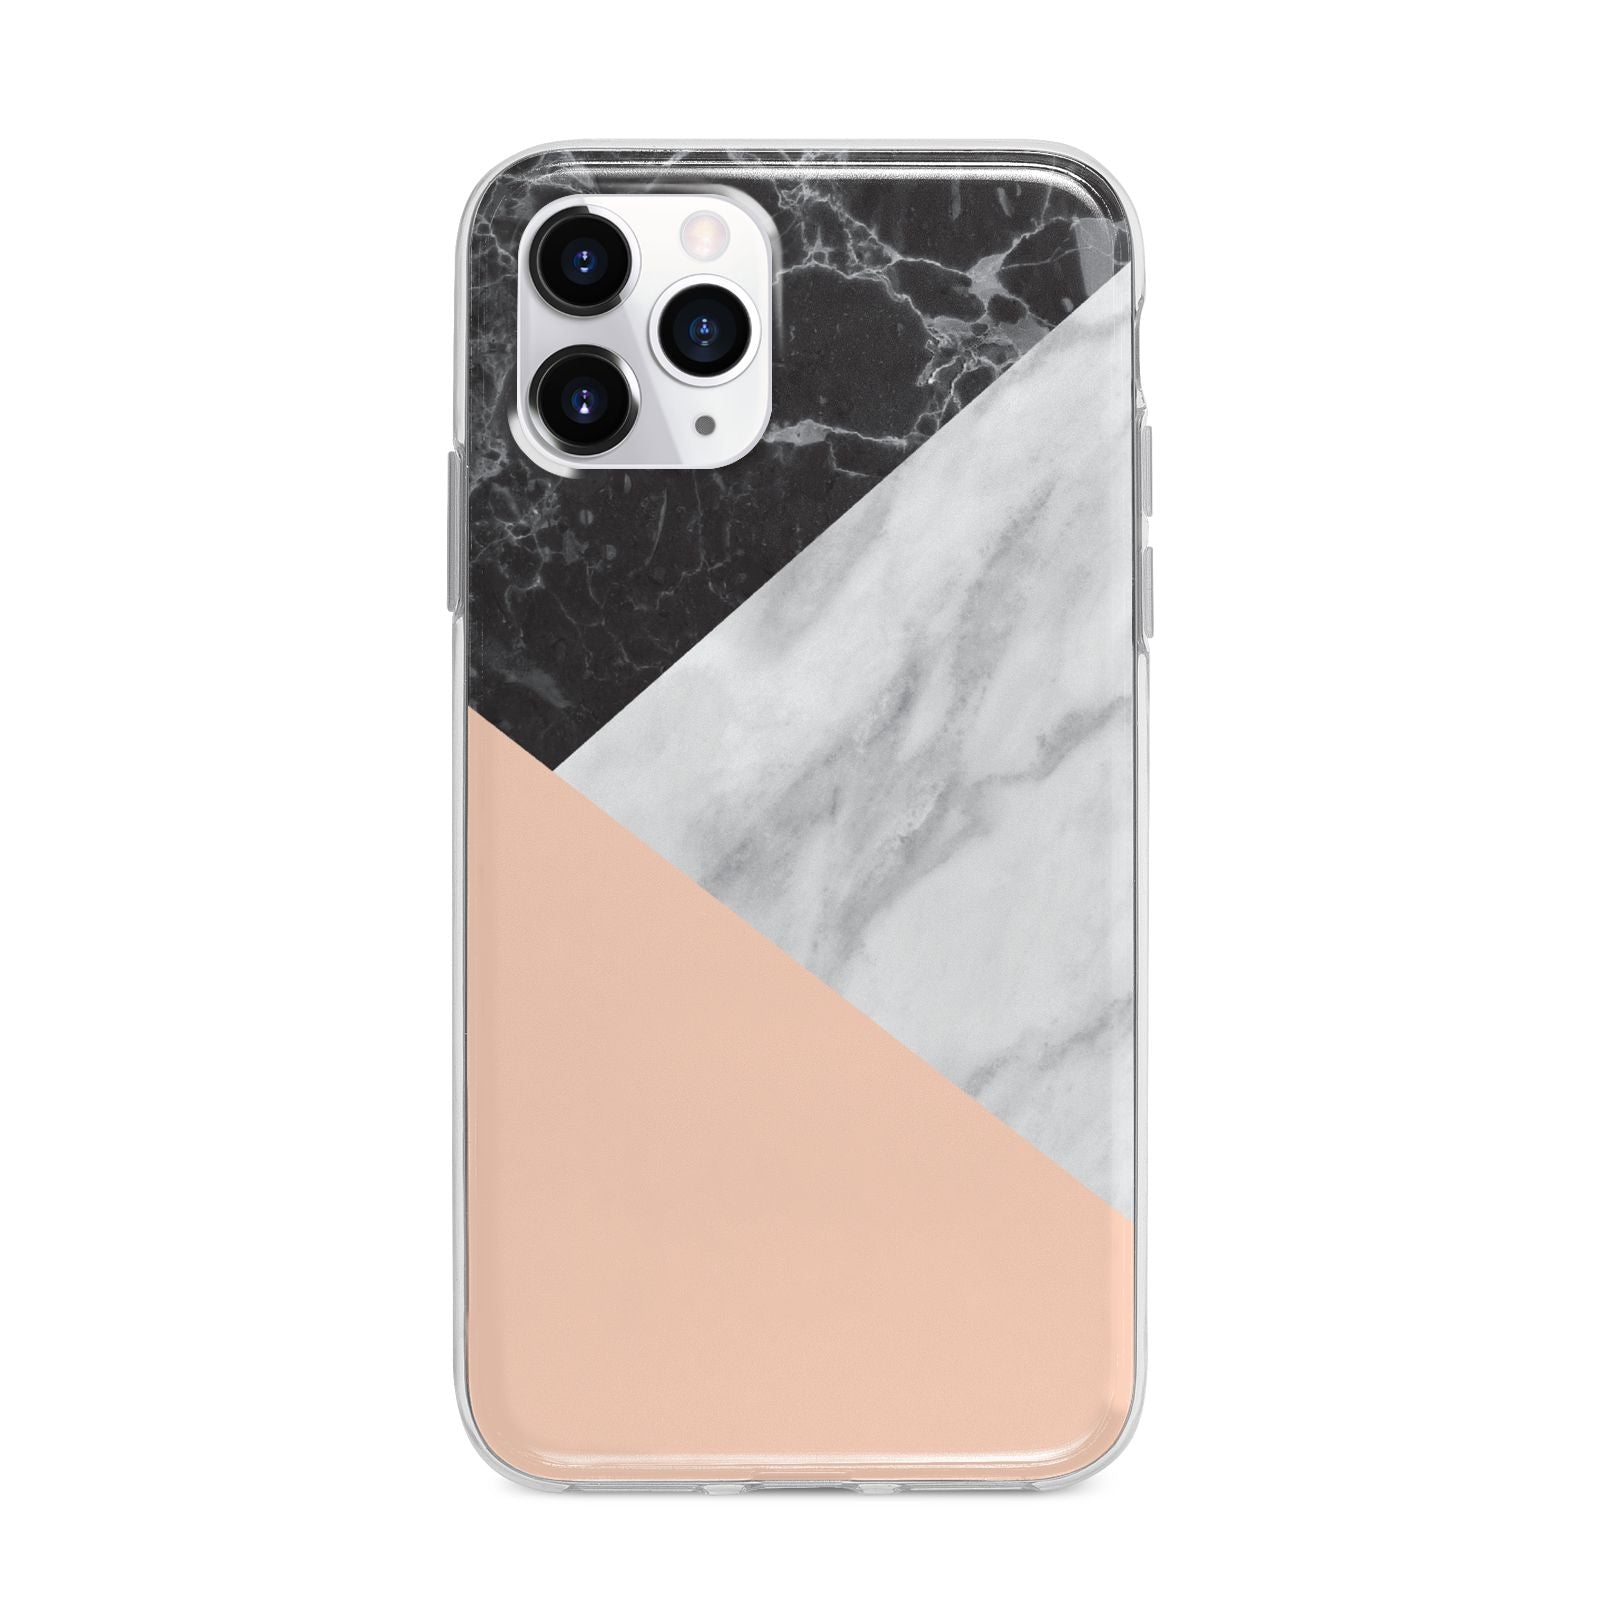 Marble Black White Grey Peach Apple iPhone 11 Pro Max in Silver with Bumper Case